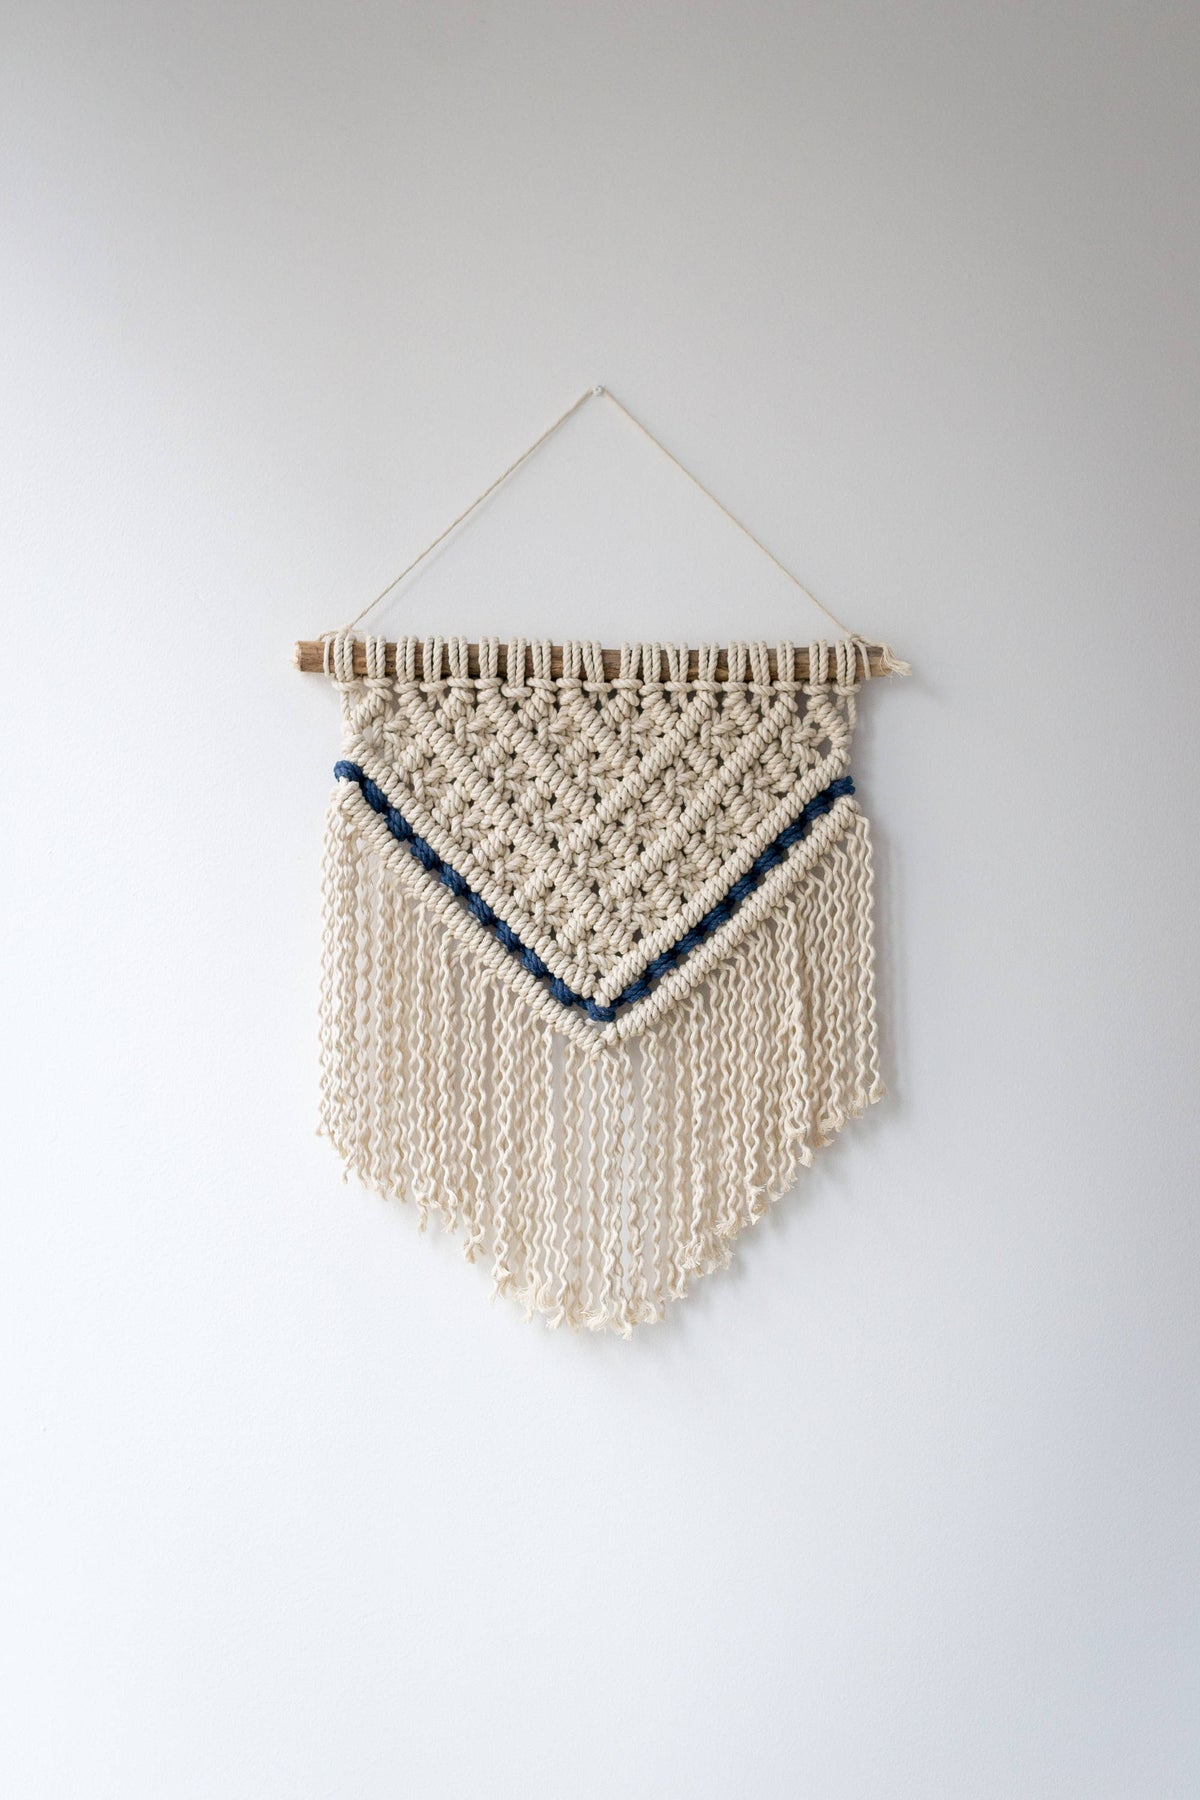 Macrame wall hanging with navy details